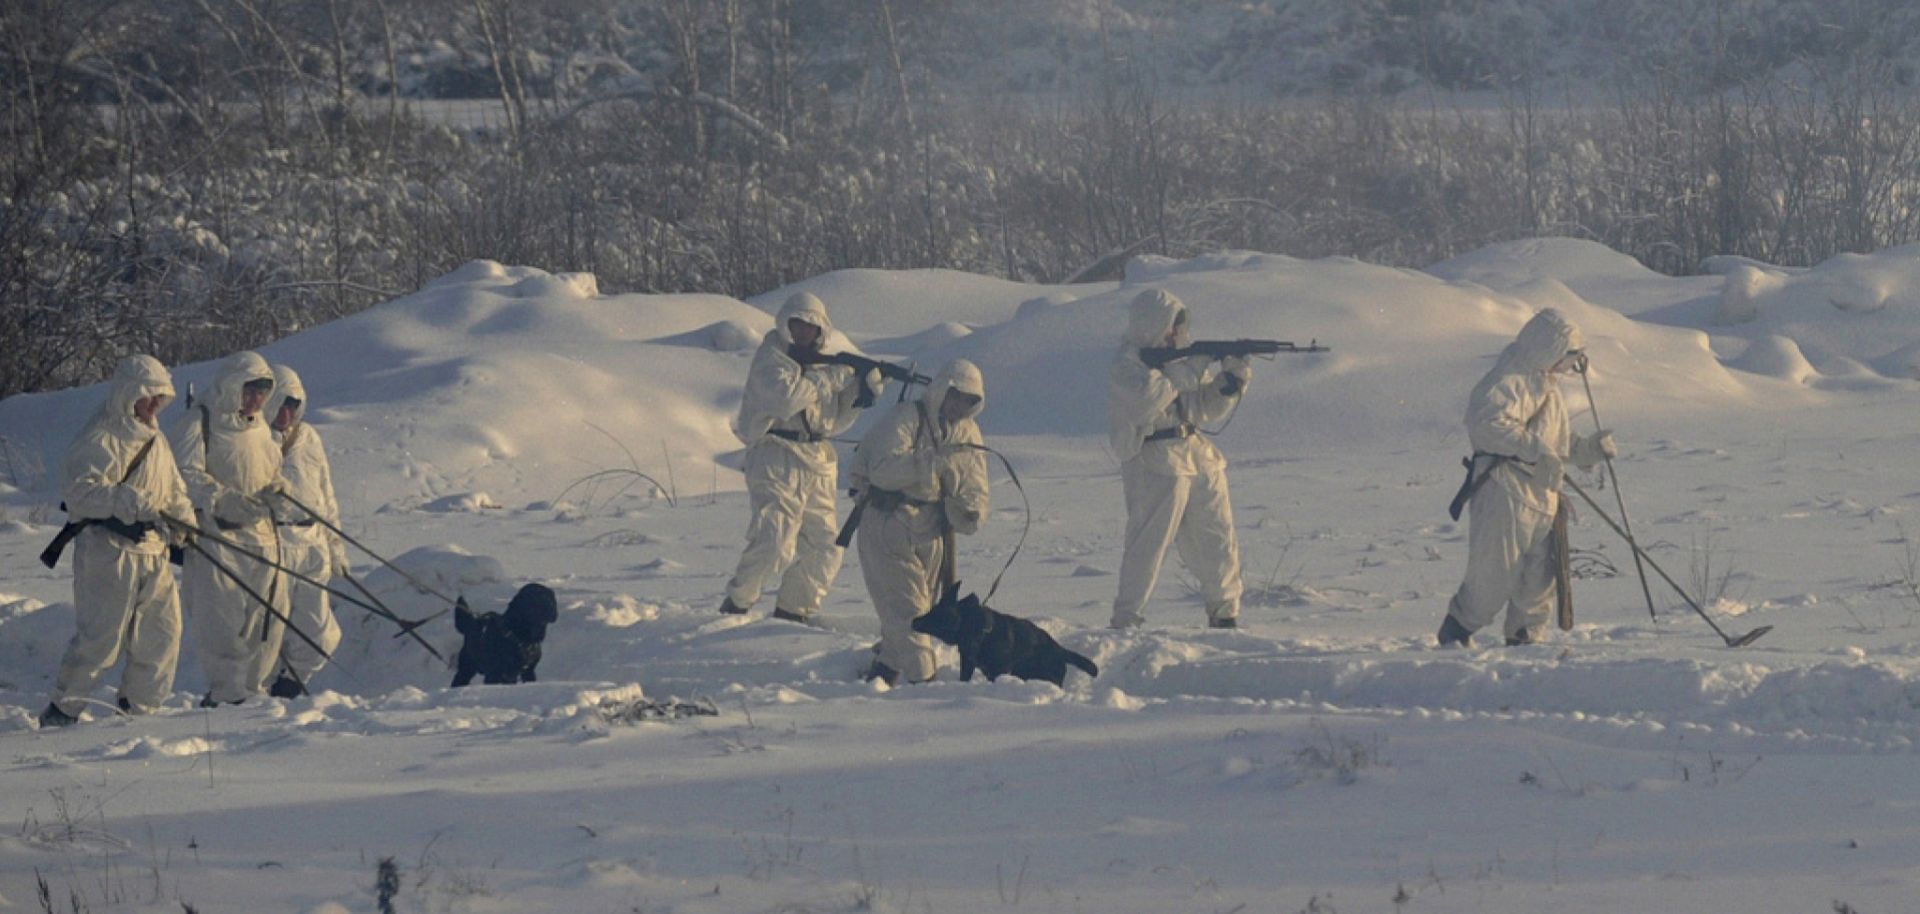 Elements from the Russian Army's Guards Engineer Brigade and Engineer Camouflage Regiment train in Arctic conditions, . Melting ice has opened up new transit routes and revealed to Moscow a lucrative prize along its vast northern frontage: the Arctic Circle.